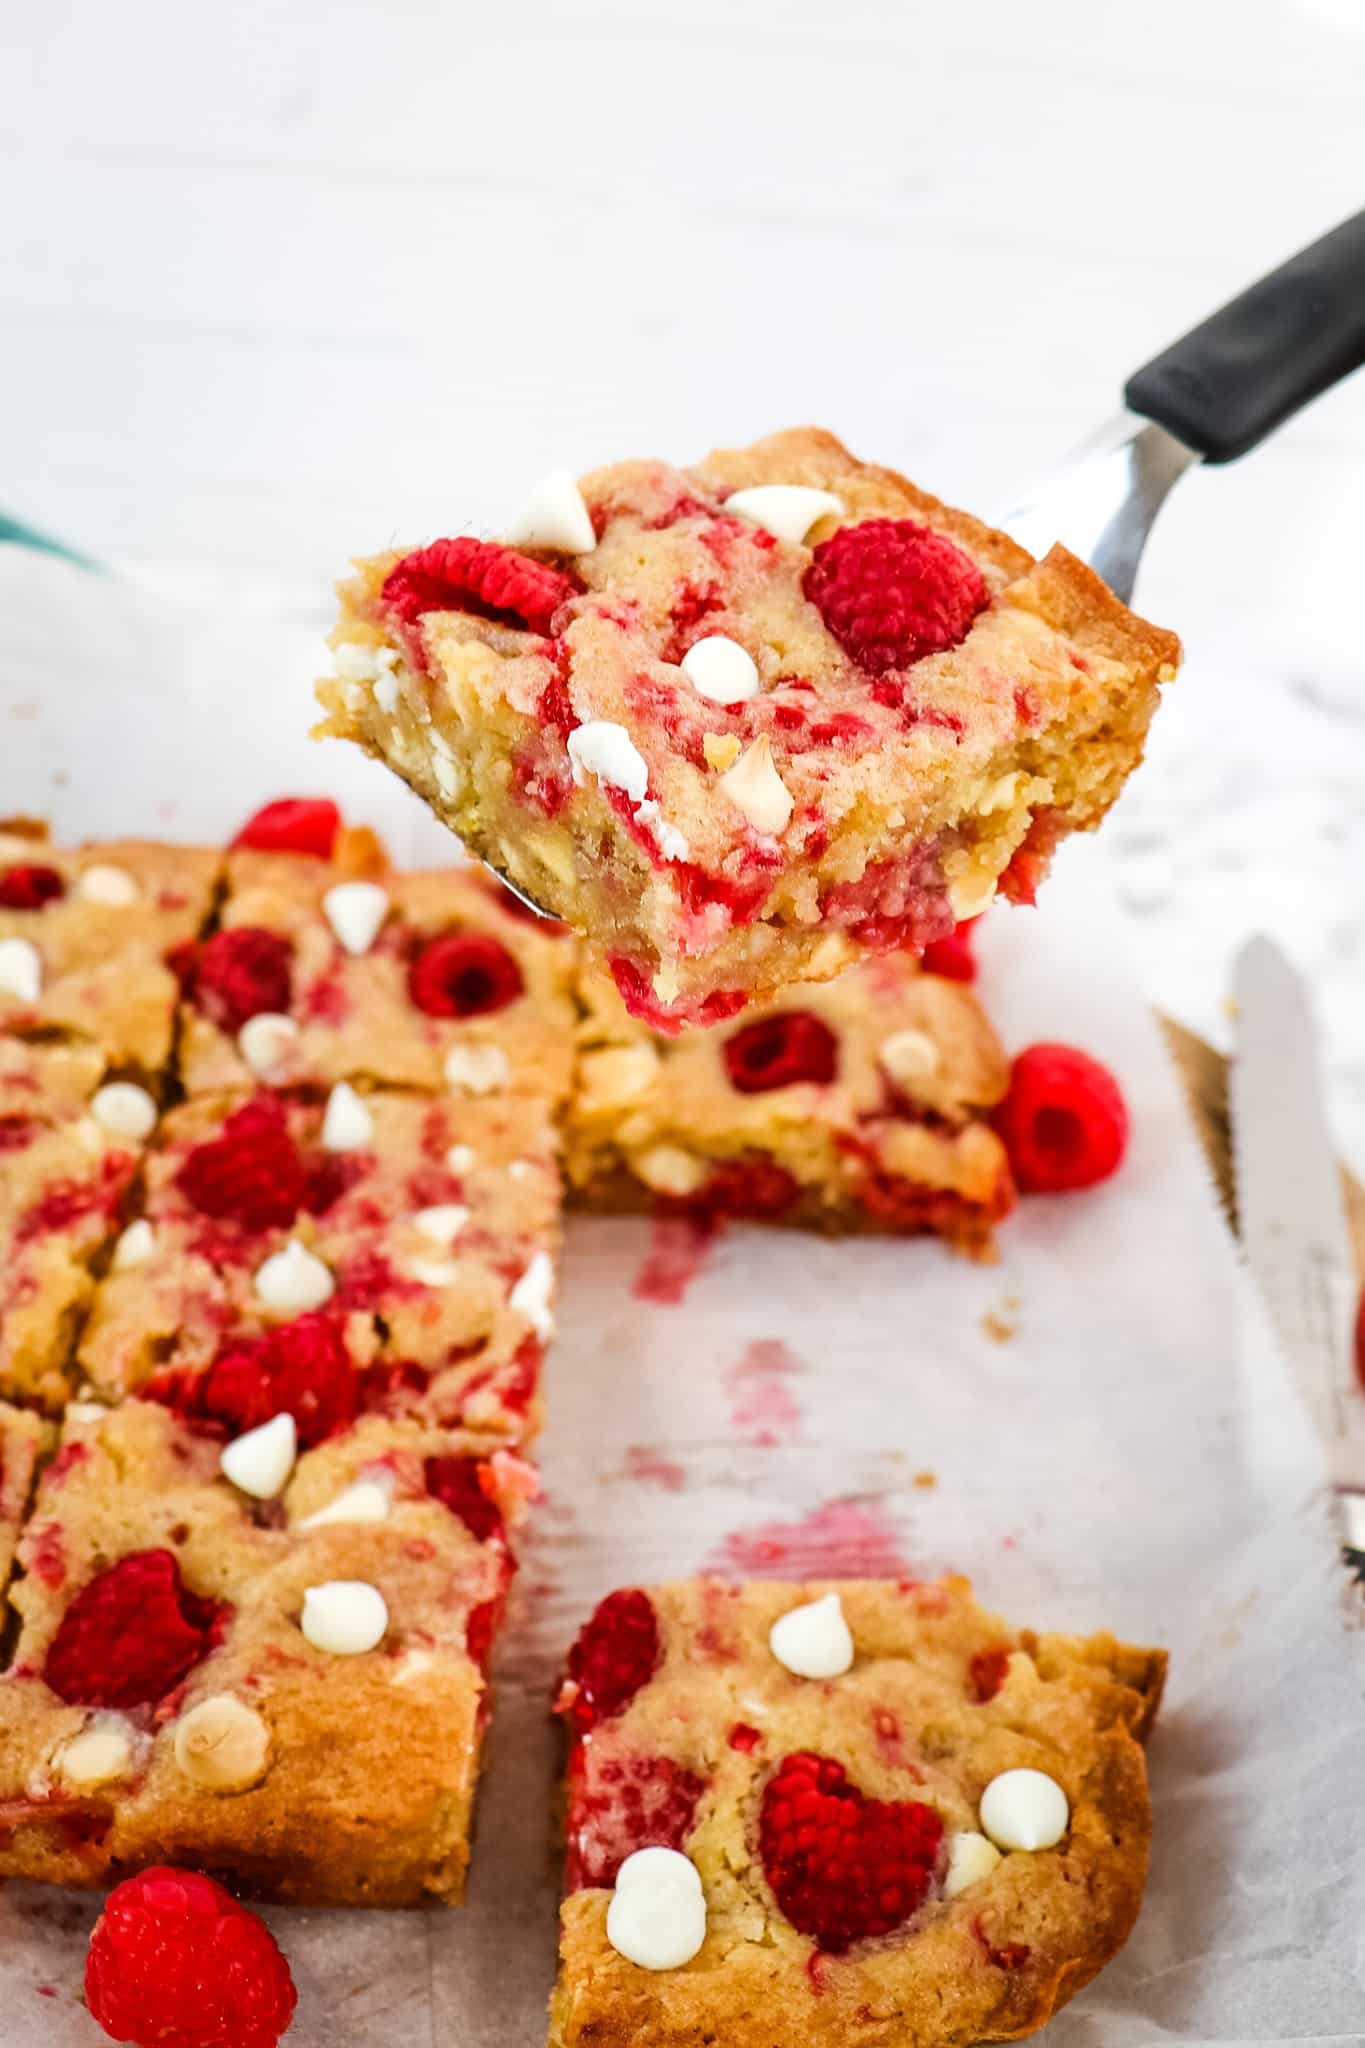 Raspberry white chocolate blondie lifted up on a spatula.